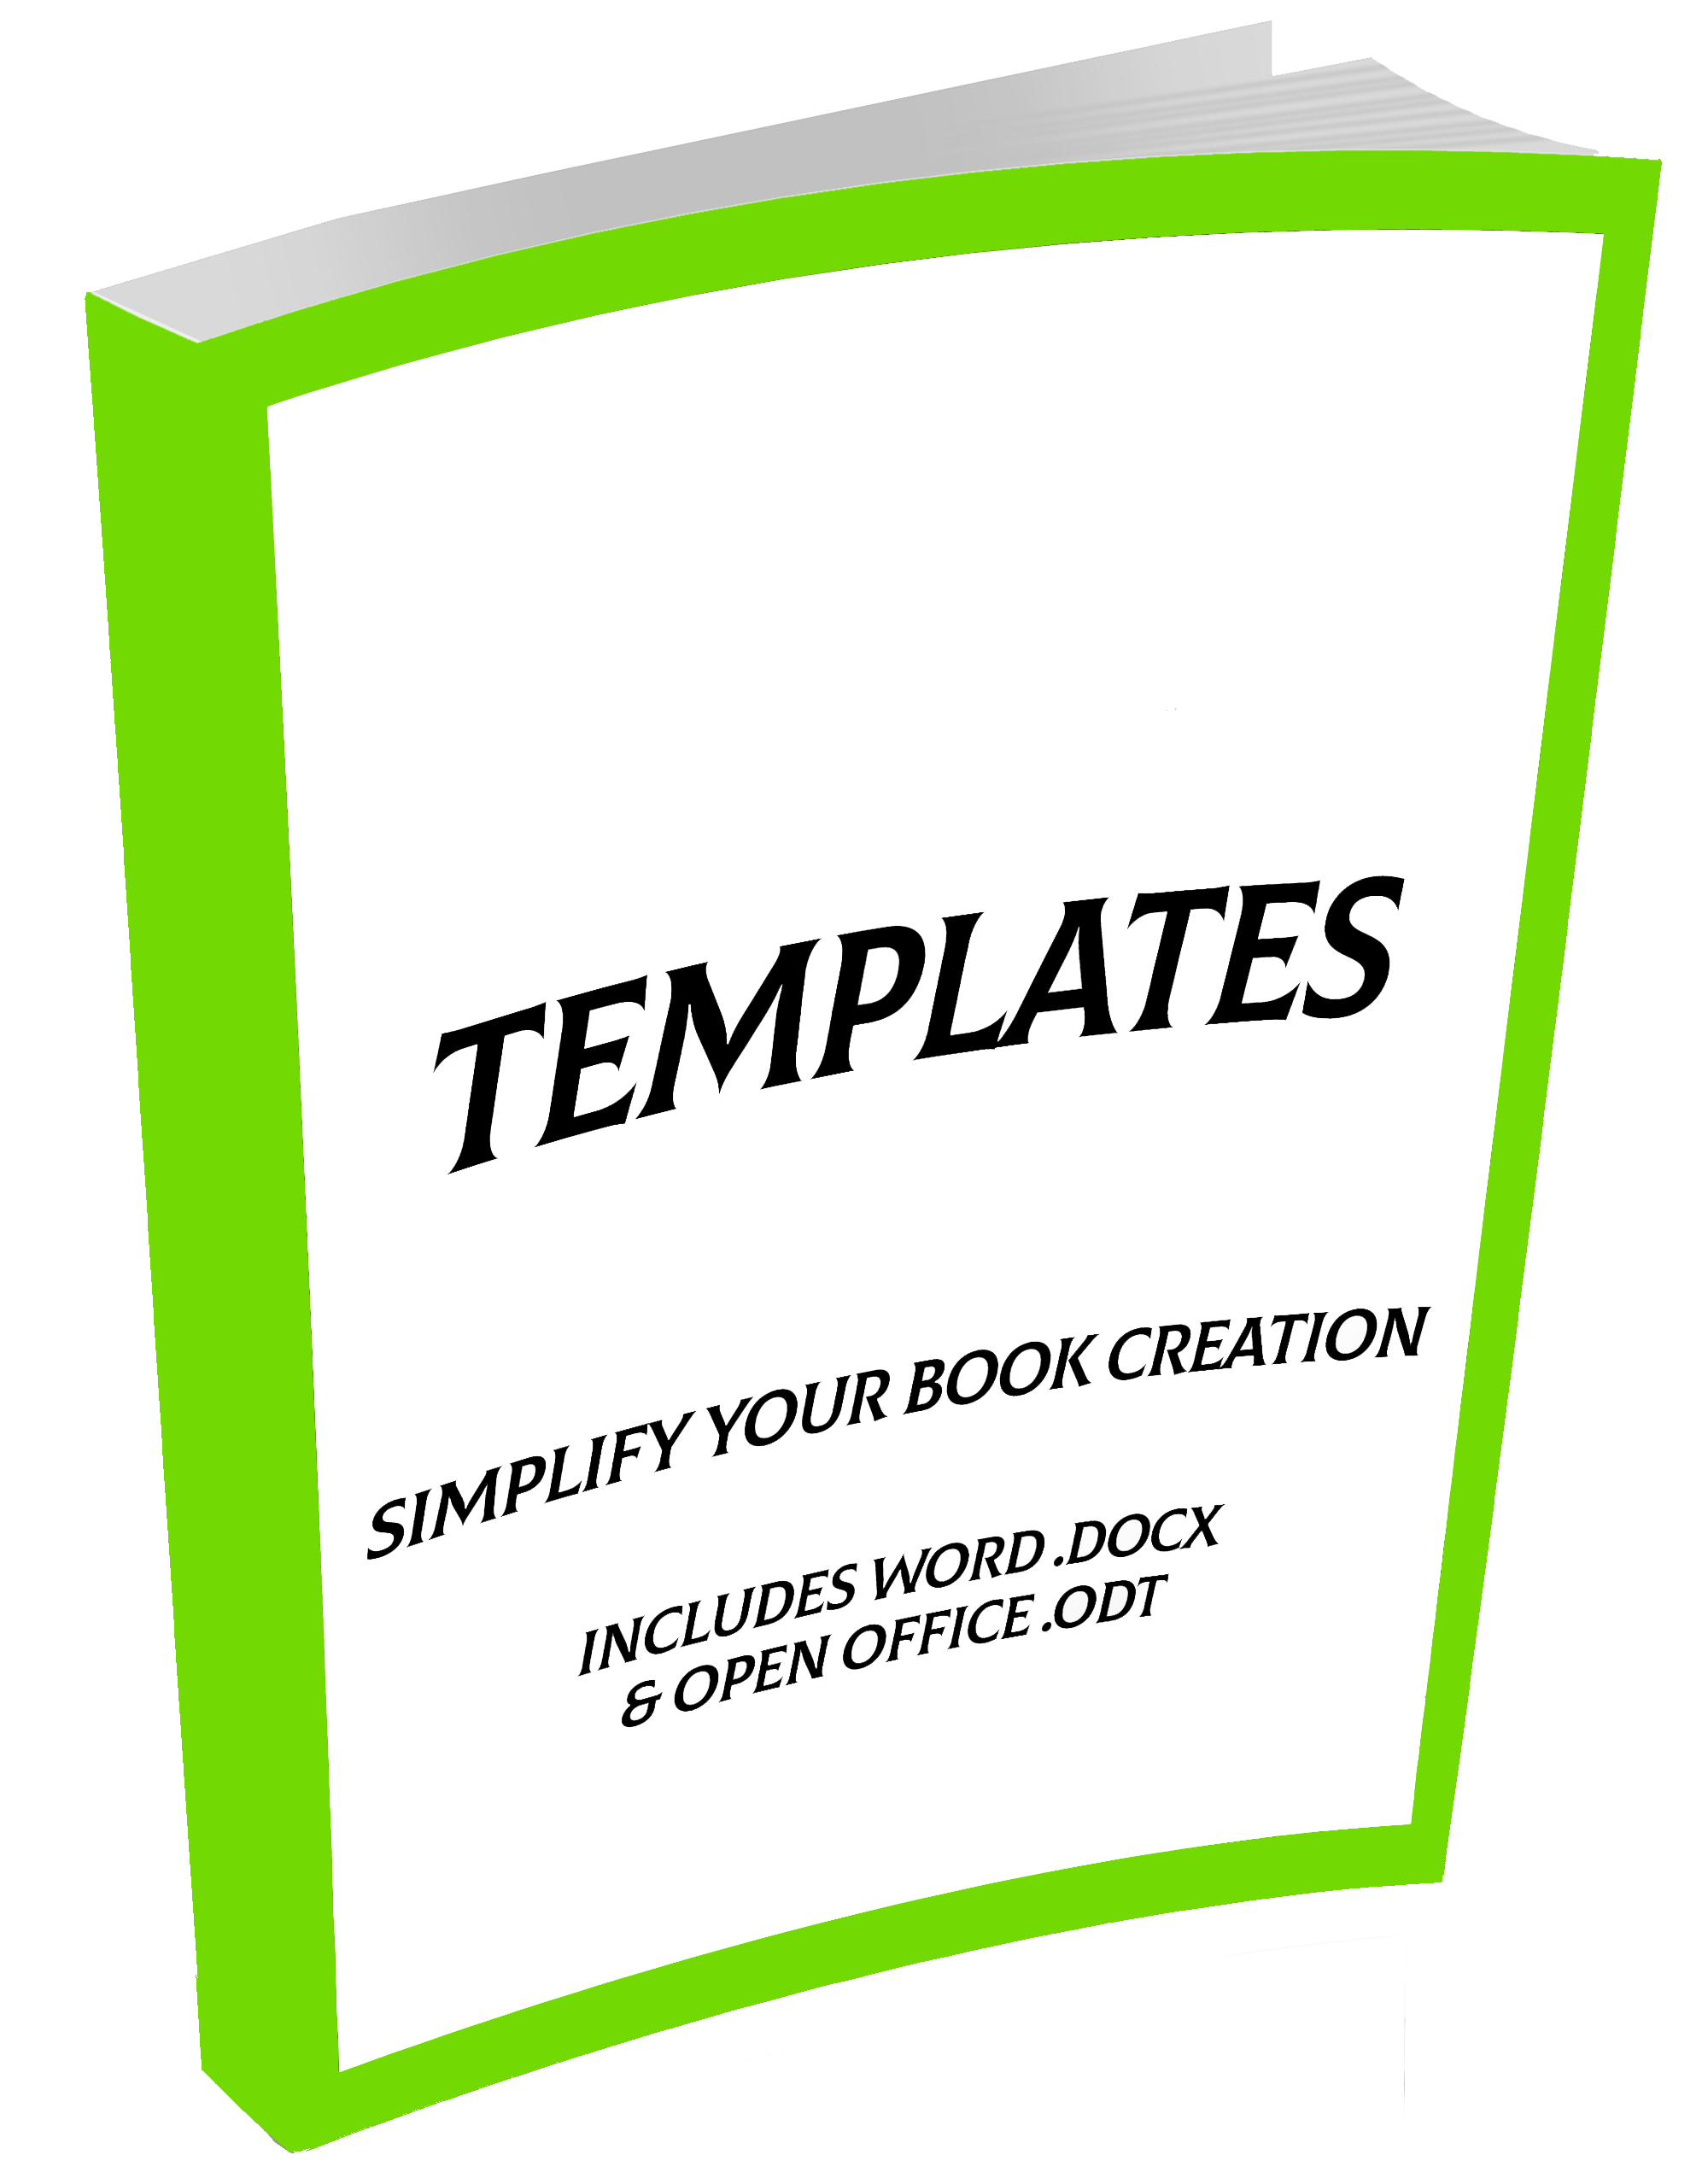 TEMPLATES - Marketers Nest